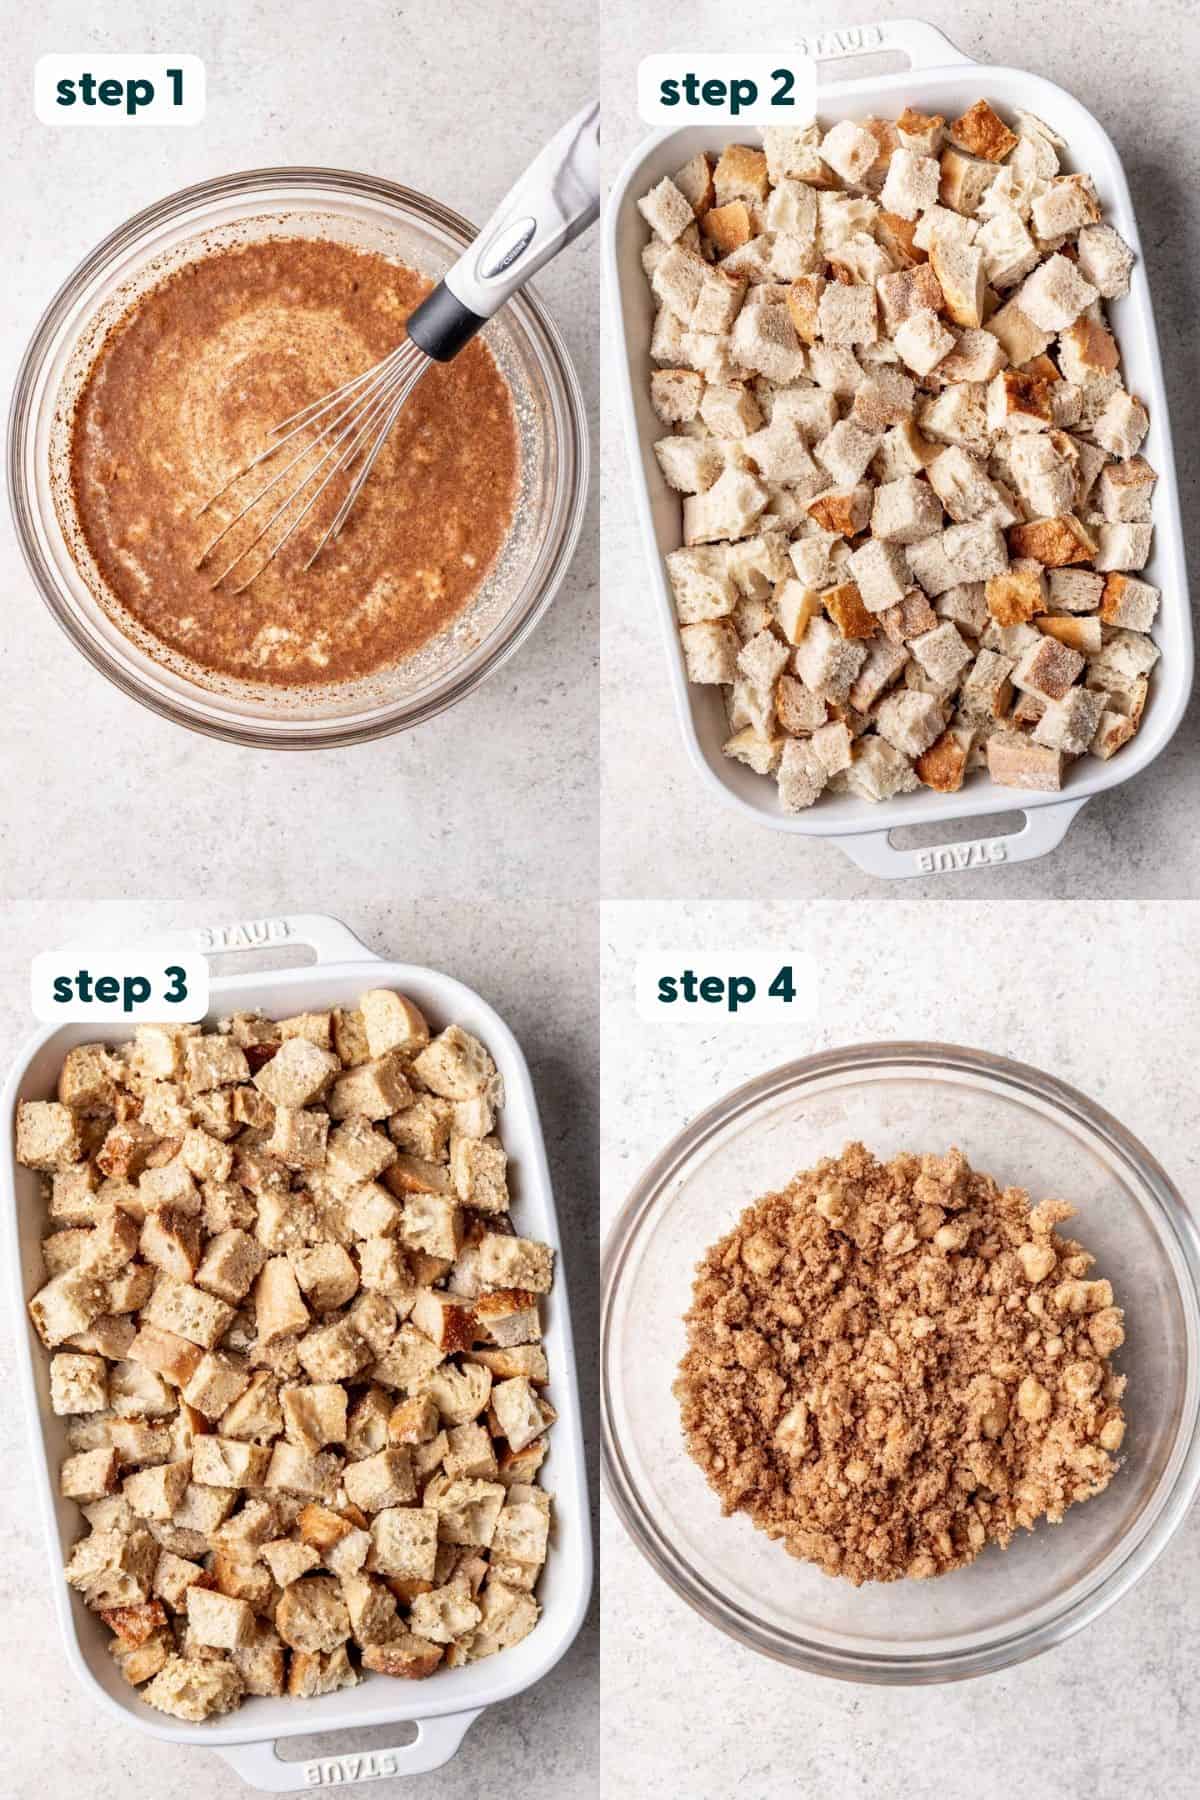 Step by step how to make vegan french toast casserole.